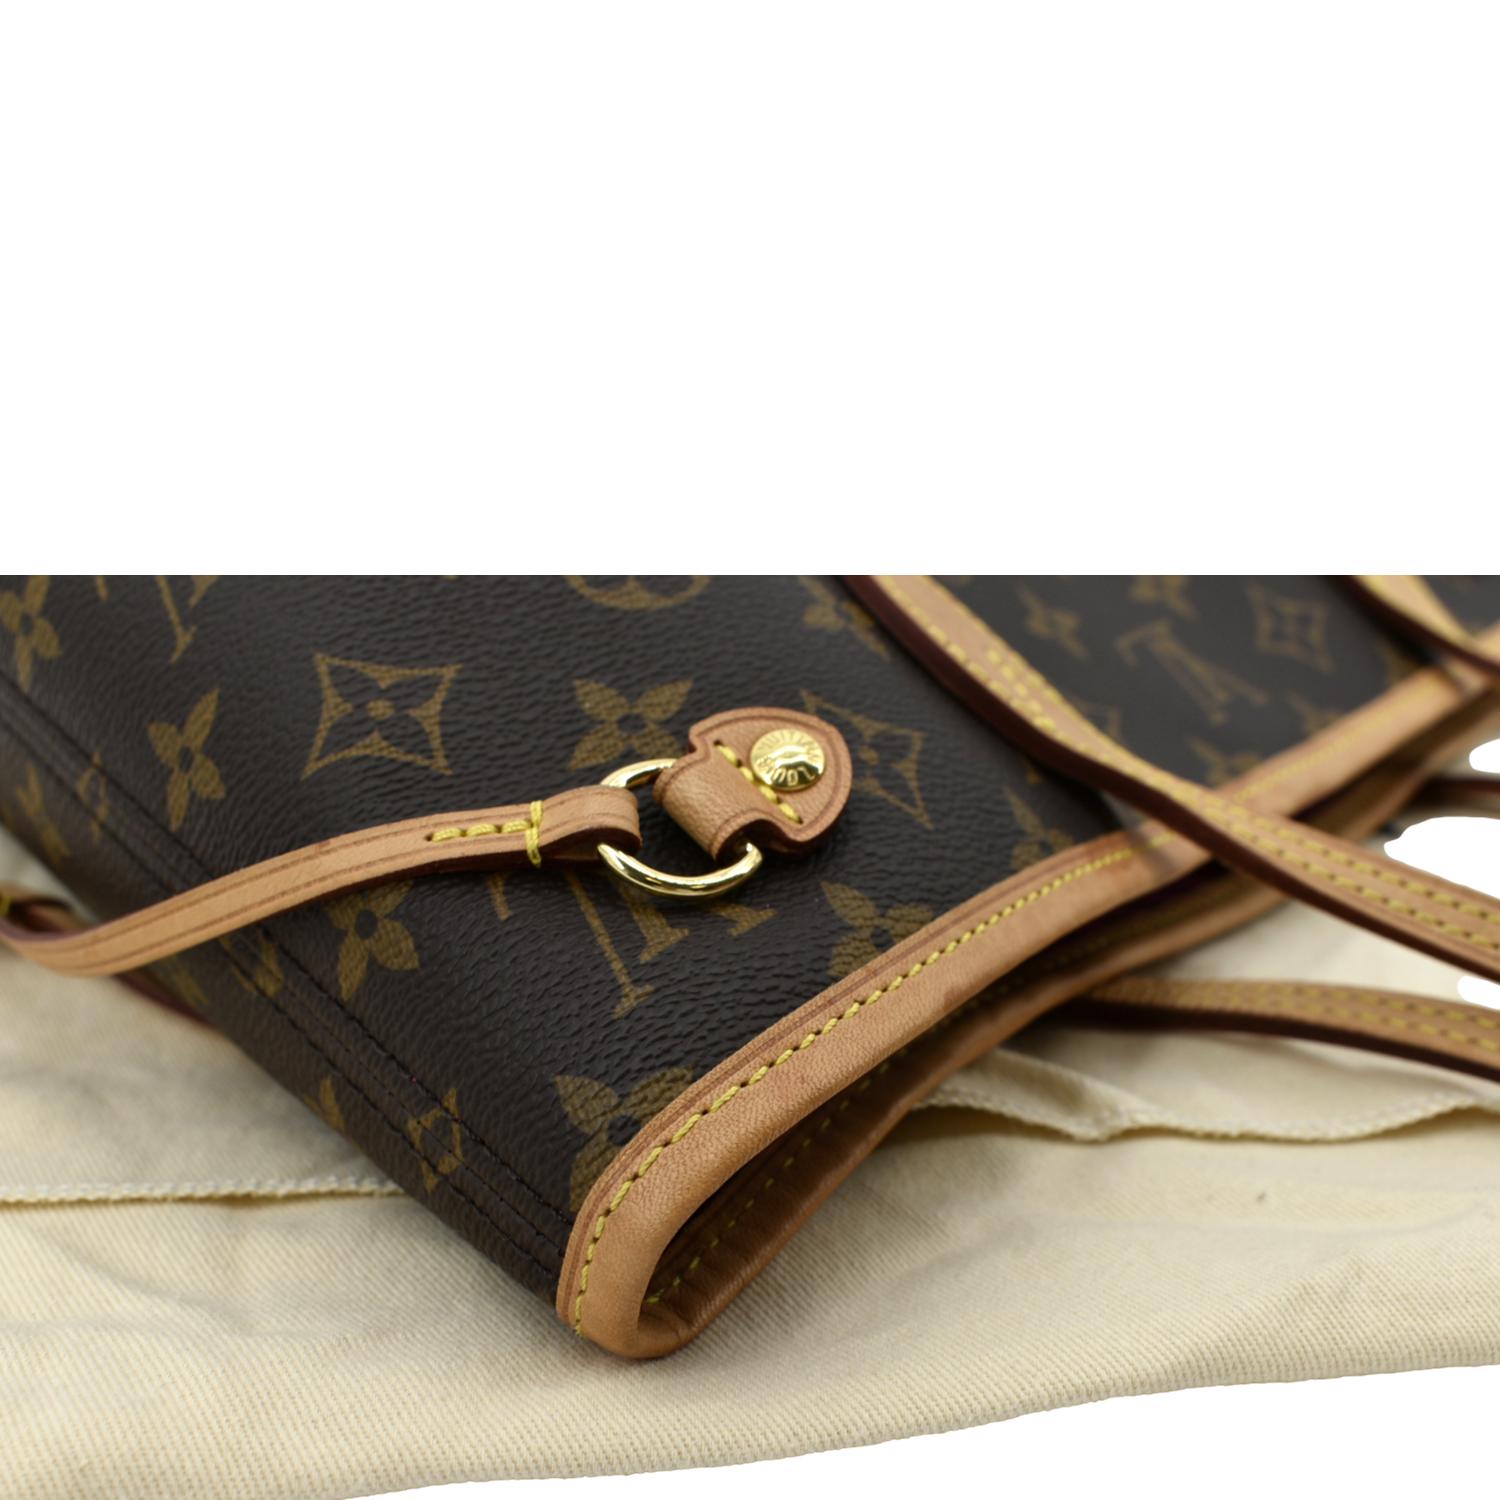 The Best Bag Not Sold in Stores: The Louis Vuitton Neverfull